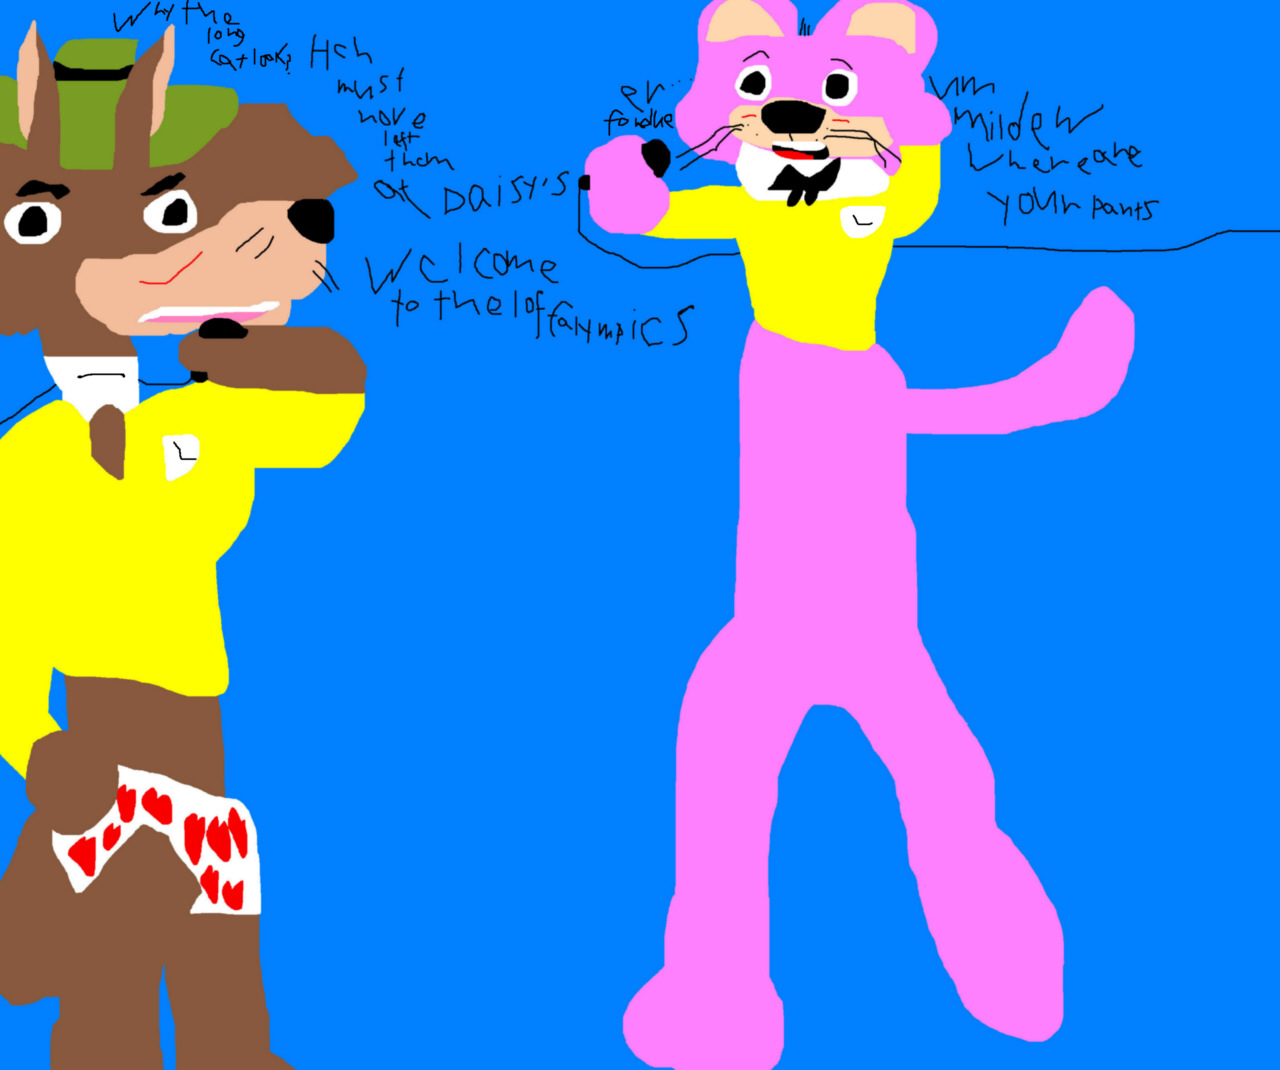 Welcome To The Laffalympics Awkward Moment Ms Paint by Falconlobo